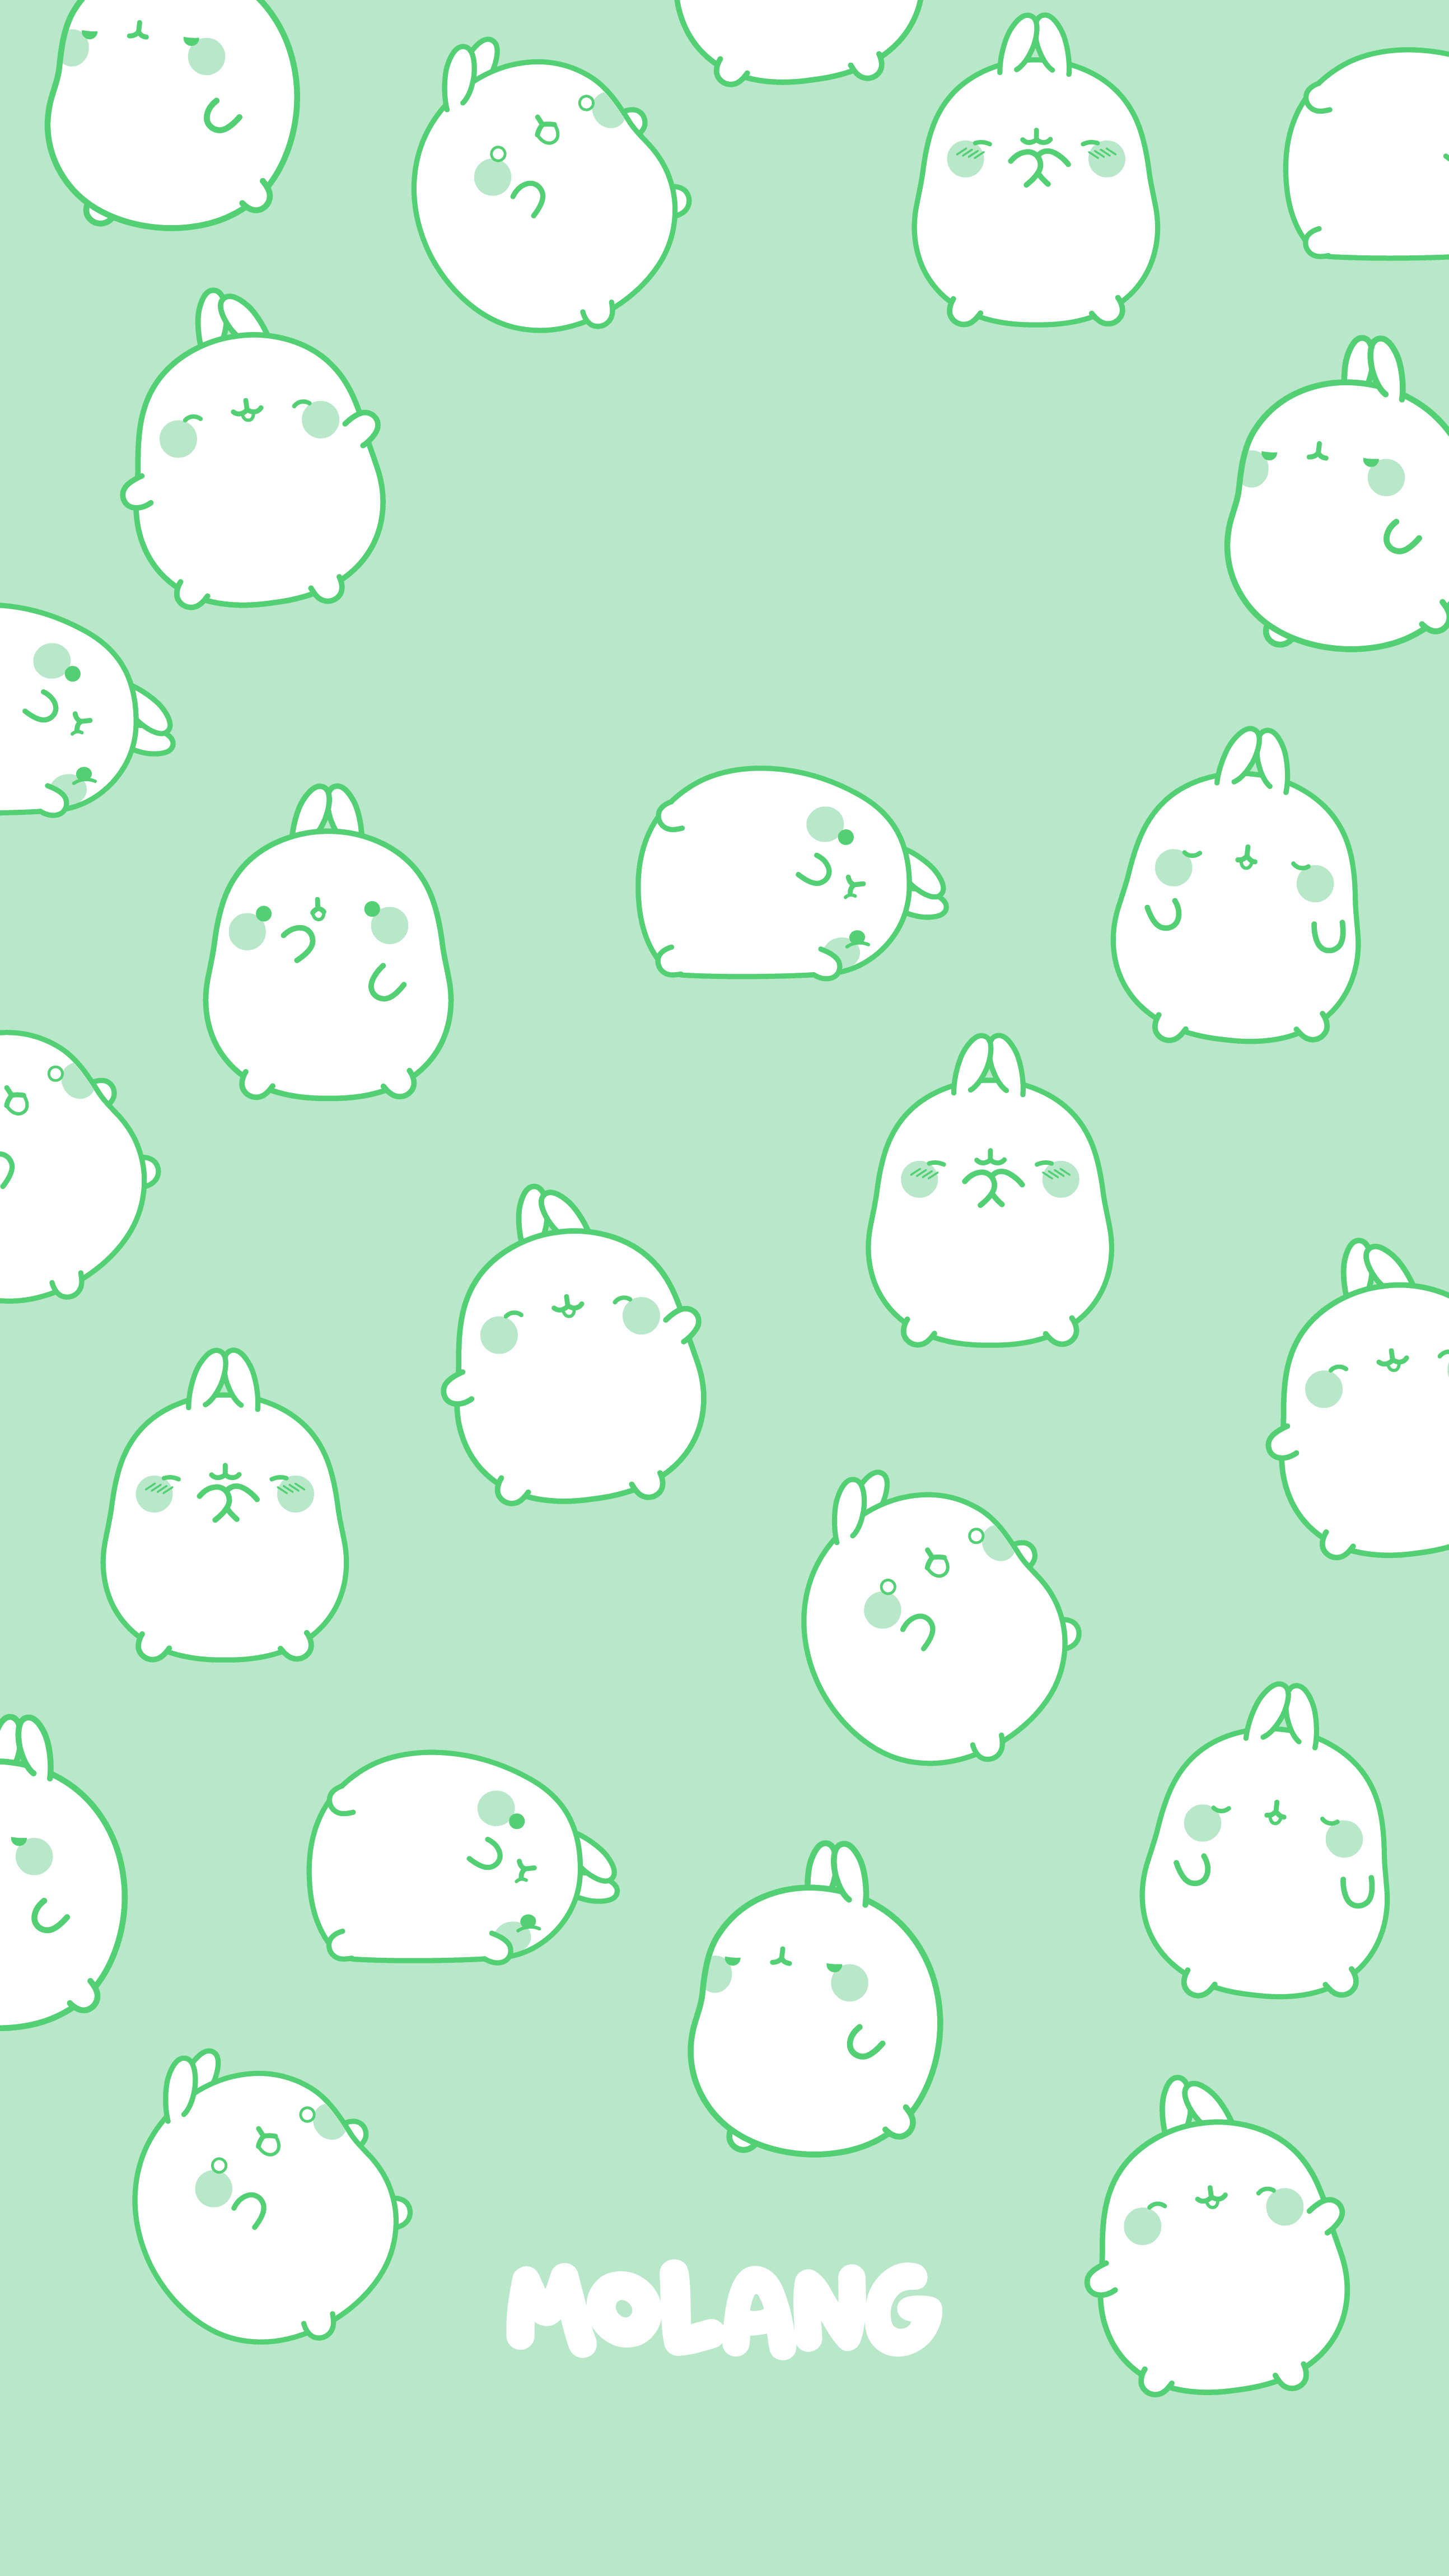 A pattern of cute little white kittens on green background - Molang